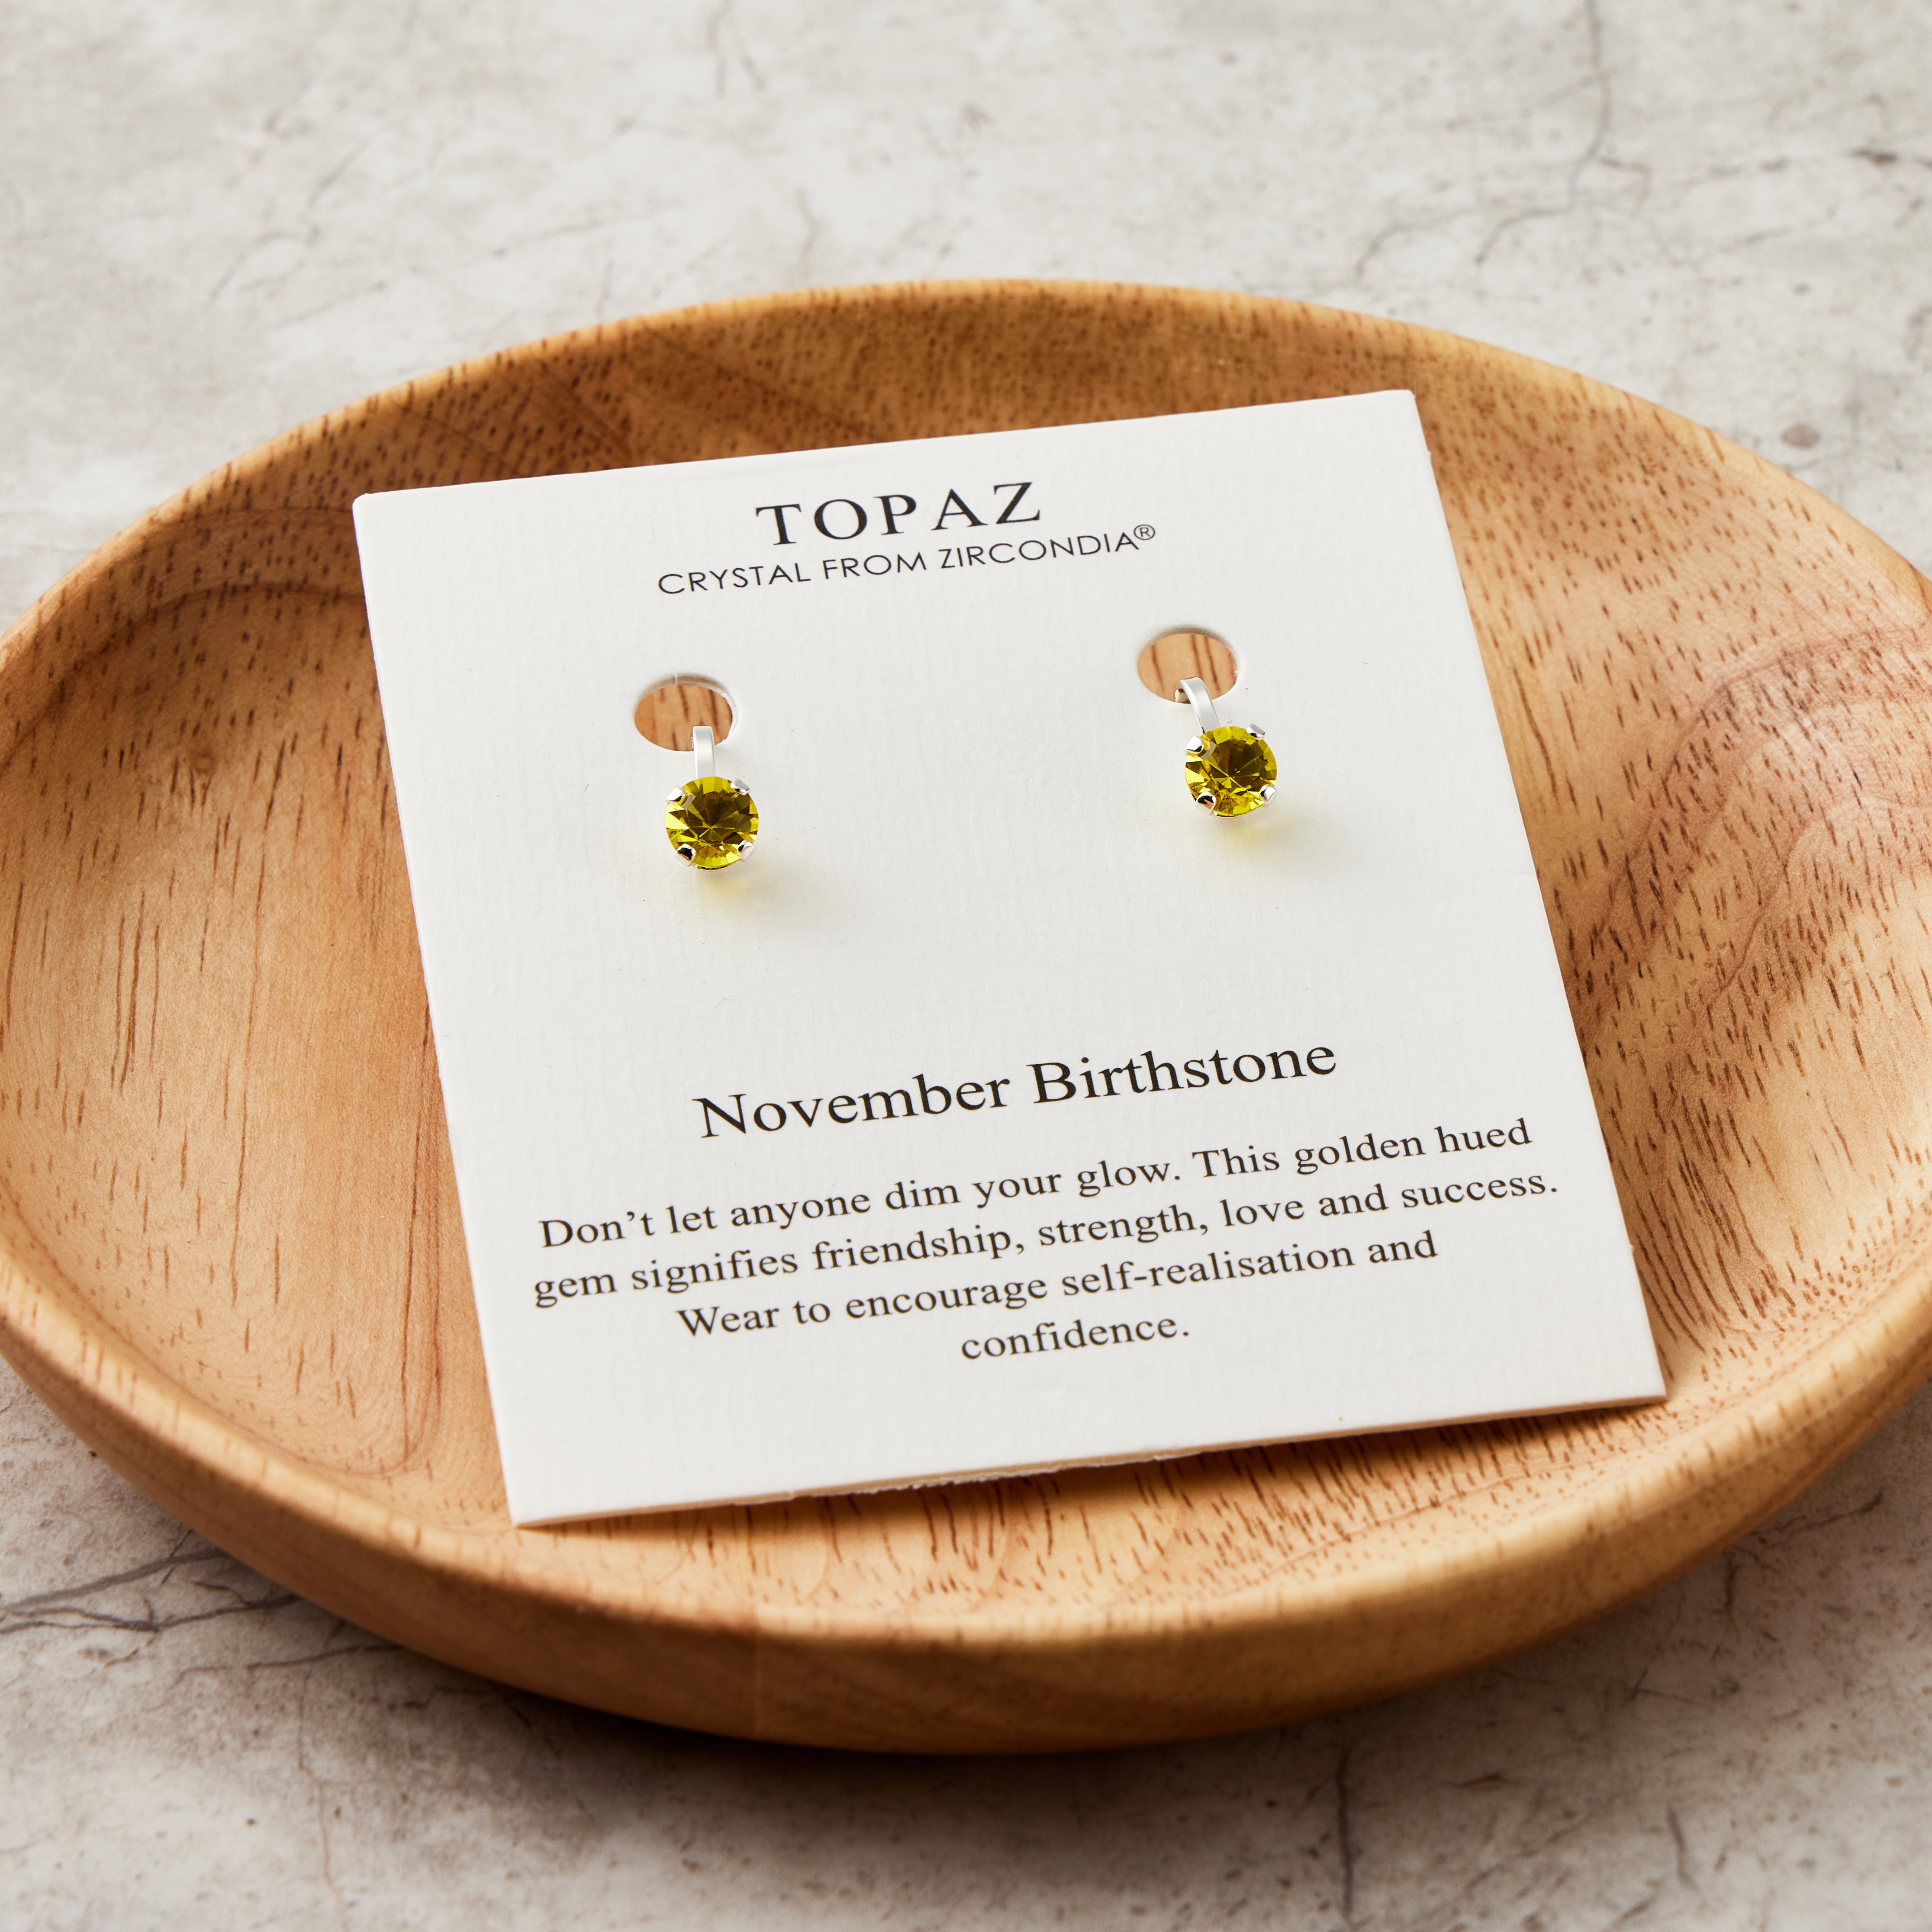 November (Topaz) Birthstone Clip On Earrings Created with Zircondia® Crystals